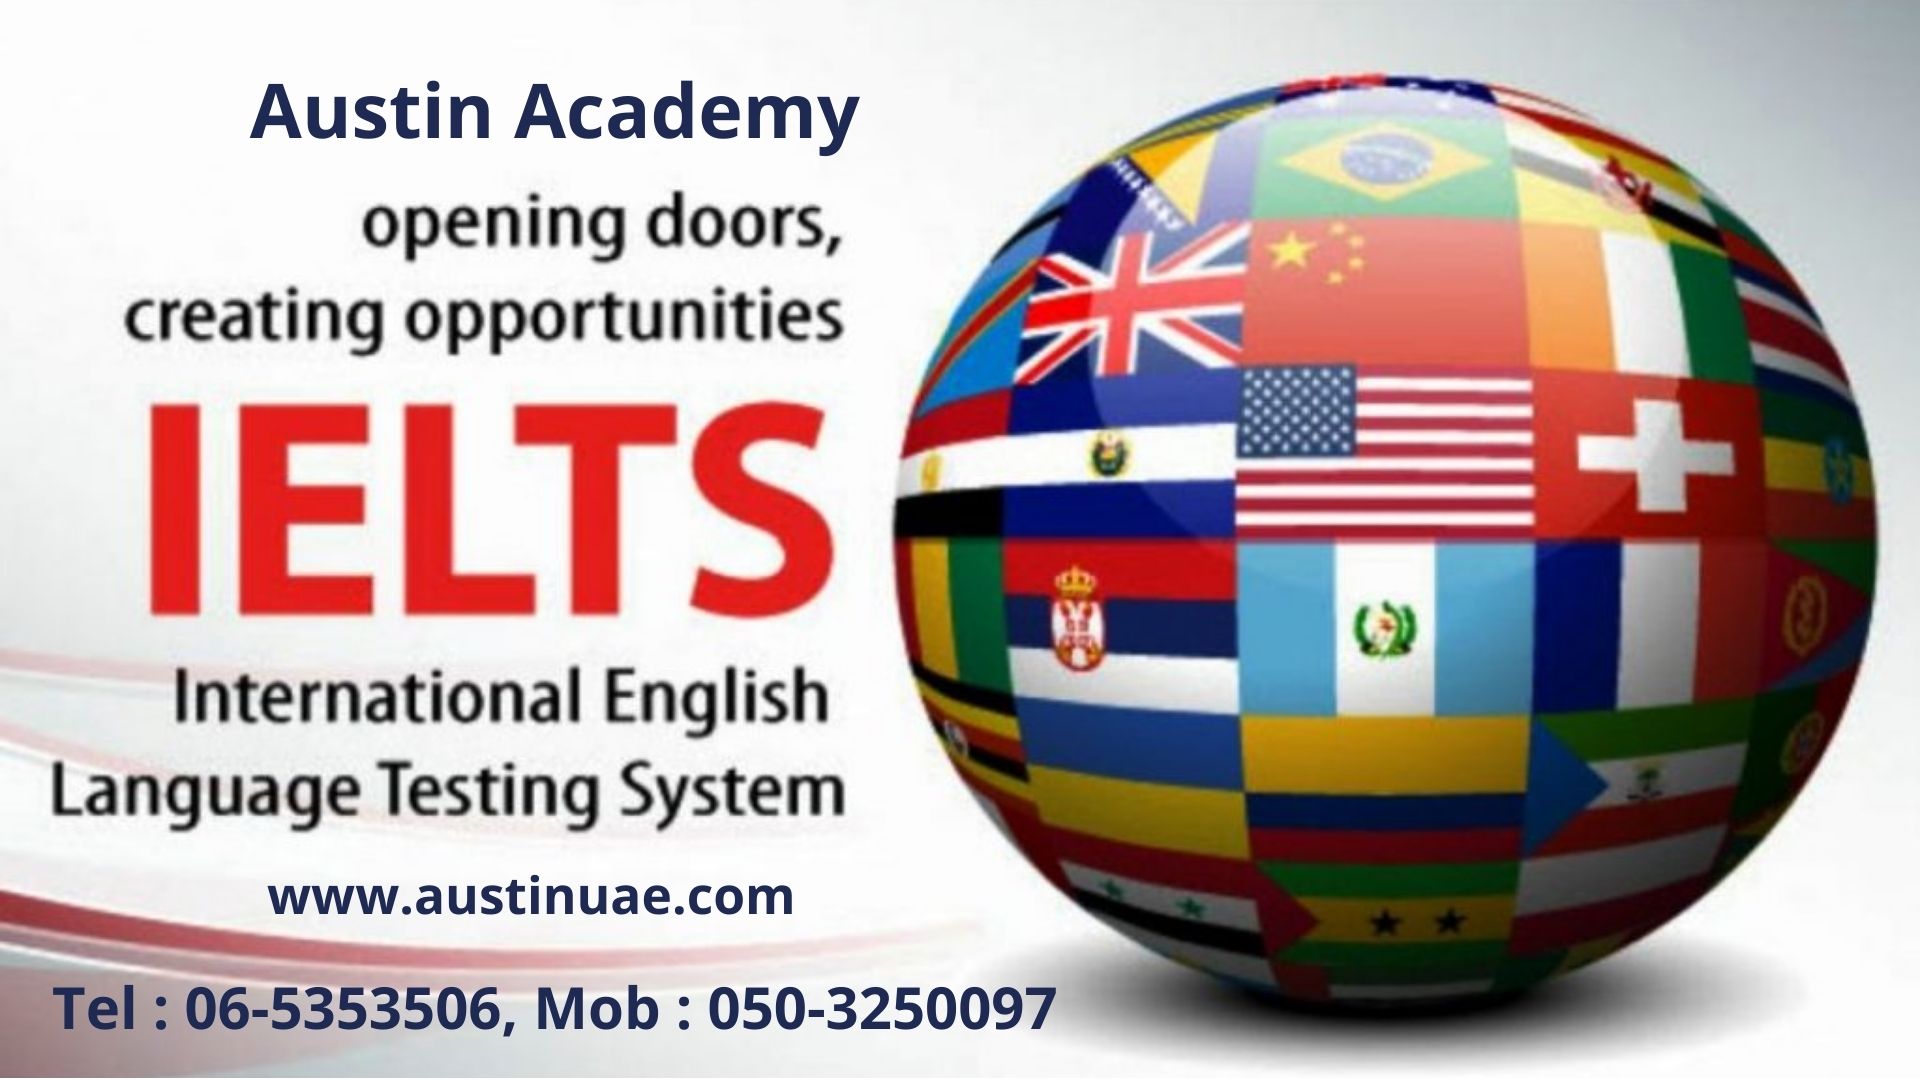 Ielts Classes In Sharjah With Best Offer Call 058 819715